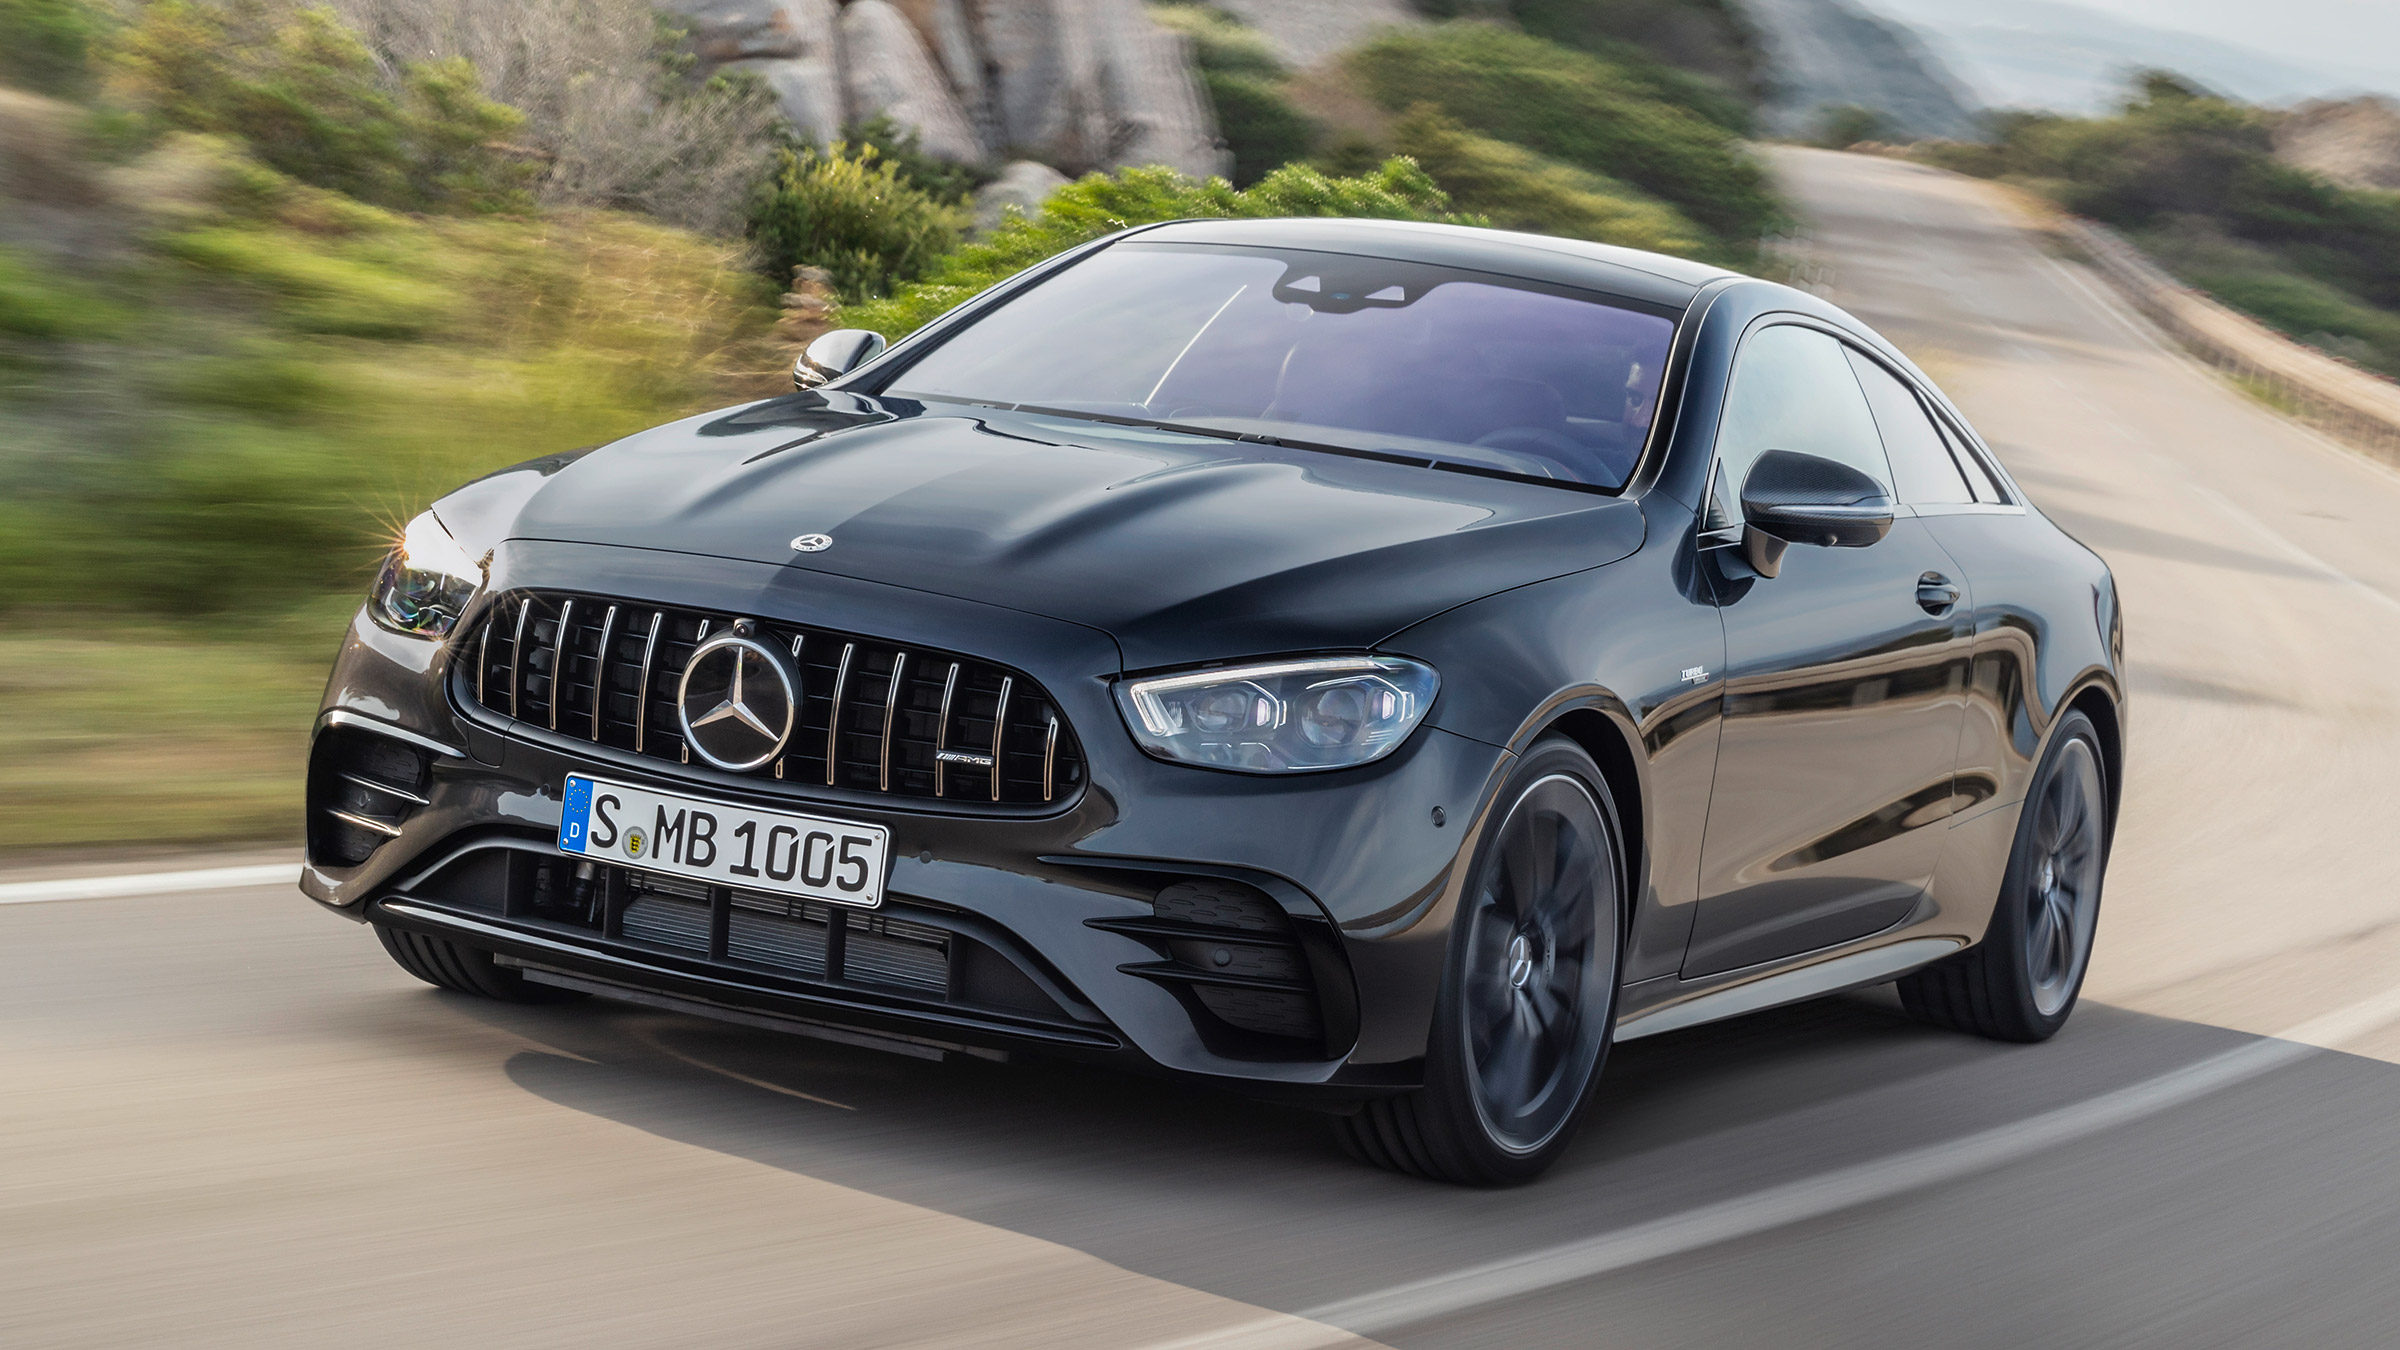 New Mercedes E Class Coupe Arrives With Prices Starting From 46k Auto Express